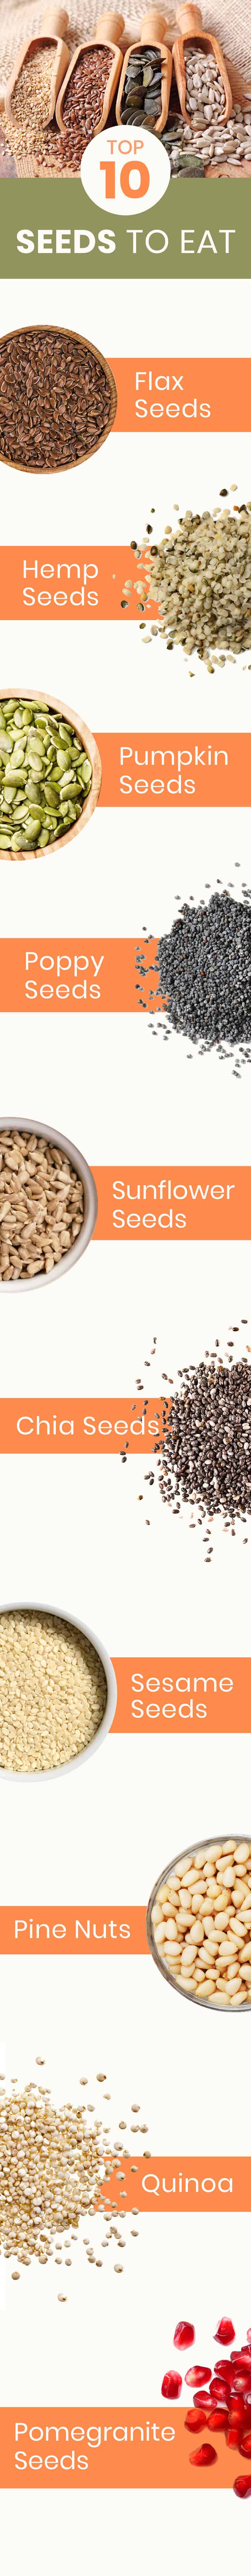 Top 10 healthiest seeds to eat - Dr. Axe